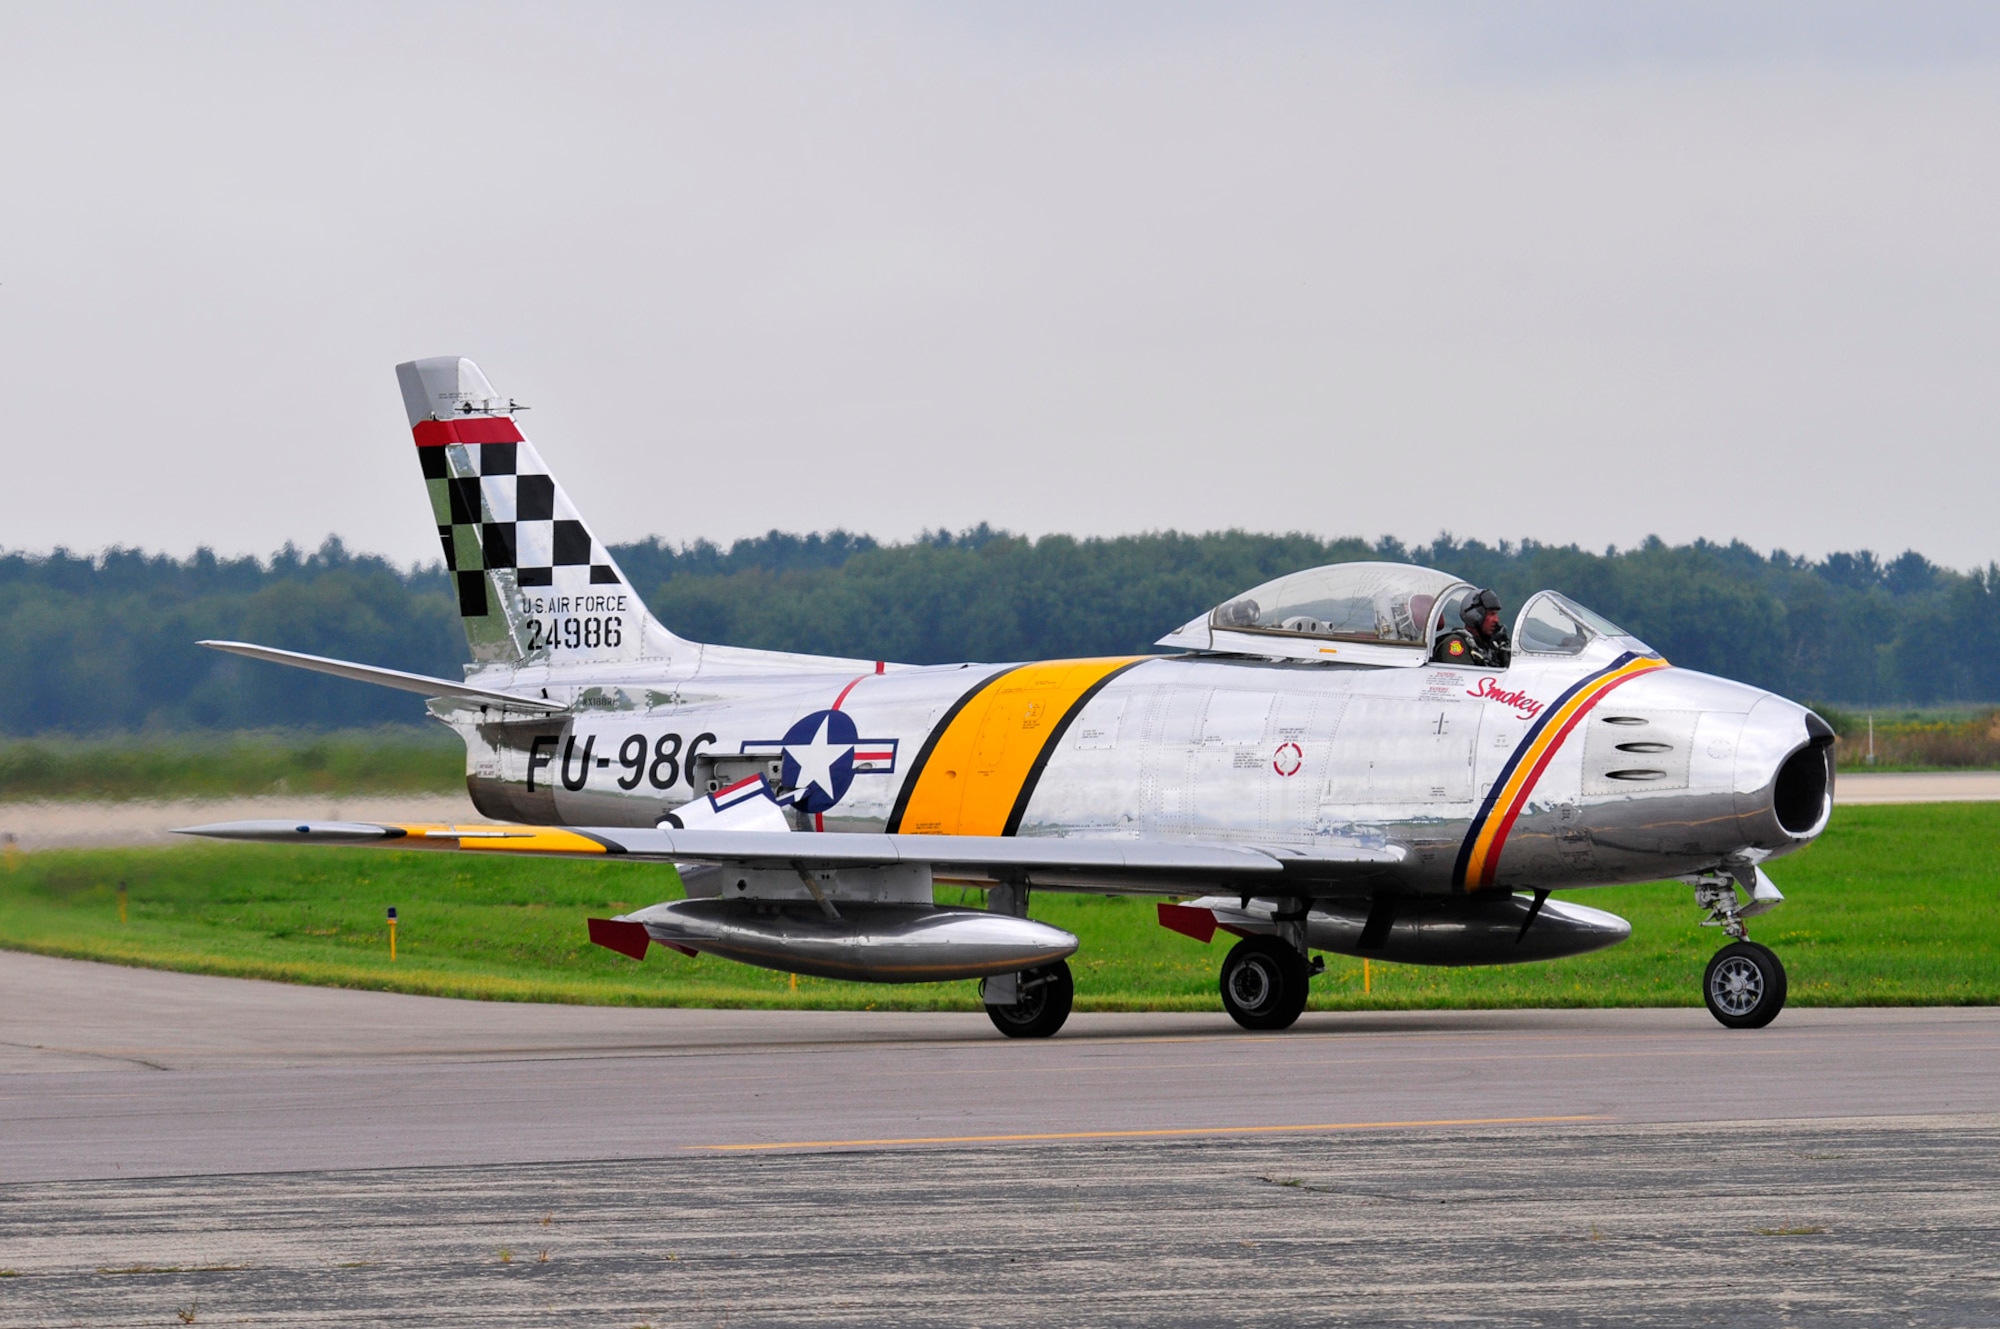 Paul Wood taxis a Korean War Vintage F-86 Saber Jet at Volk Field Open House, 21 Aug 2010.  (U.S. Air Force photo courtesy Joe Oliva) (RELEASED).